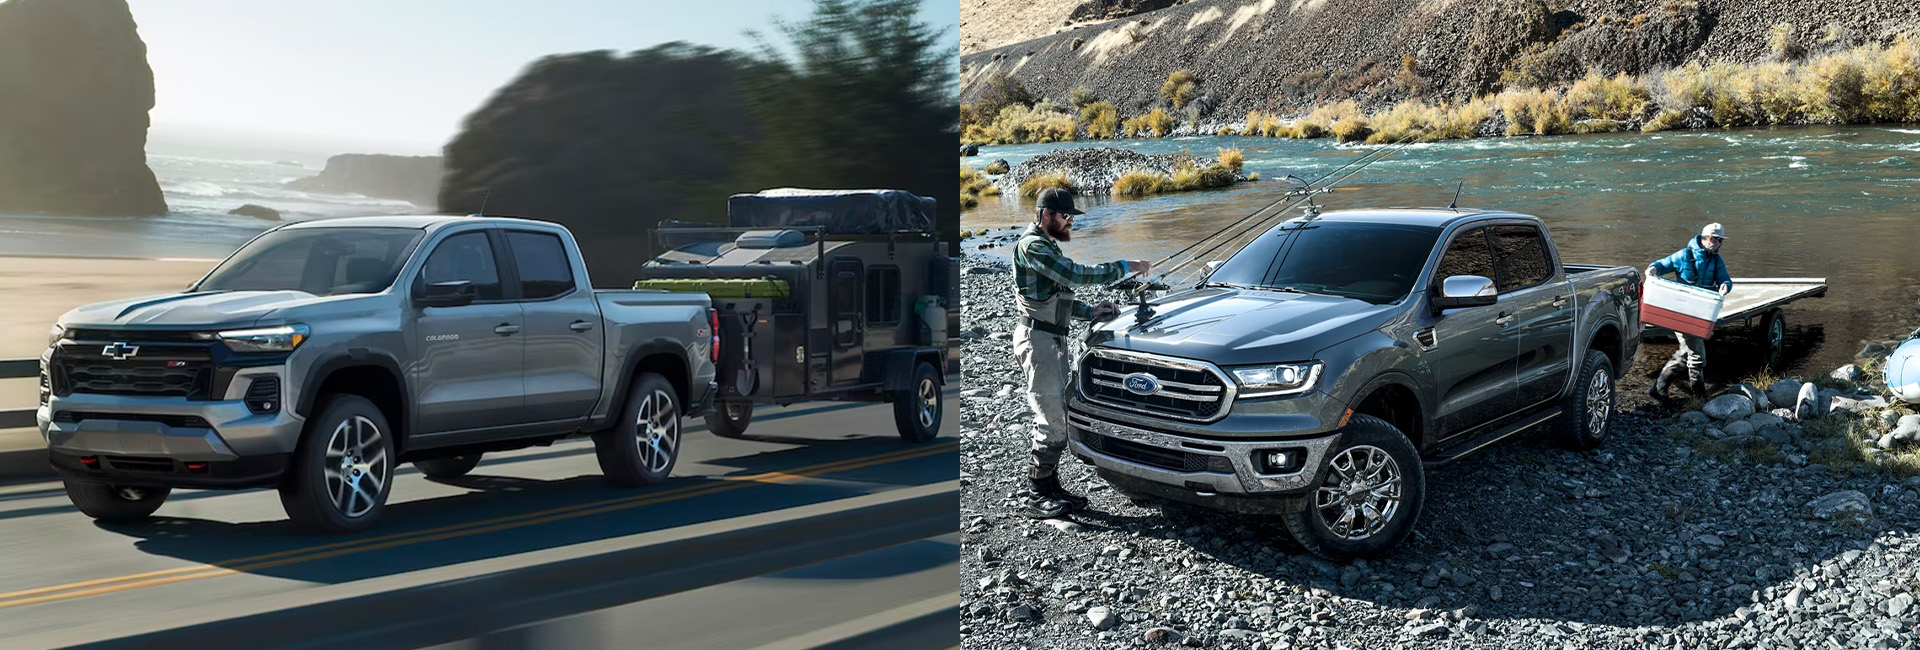 Which Heavy Duty Truck is Best for Towing?